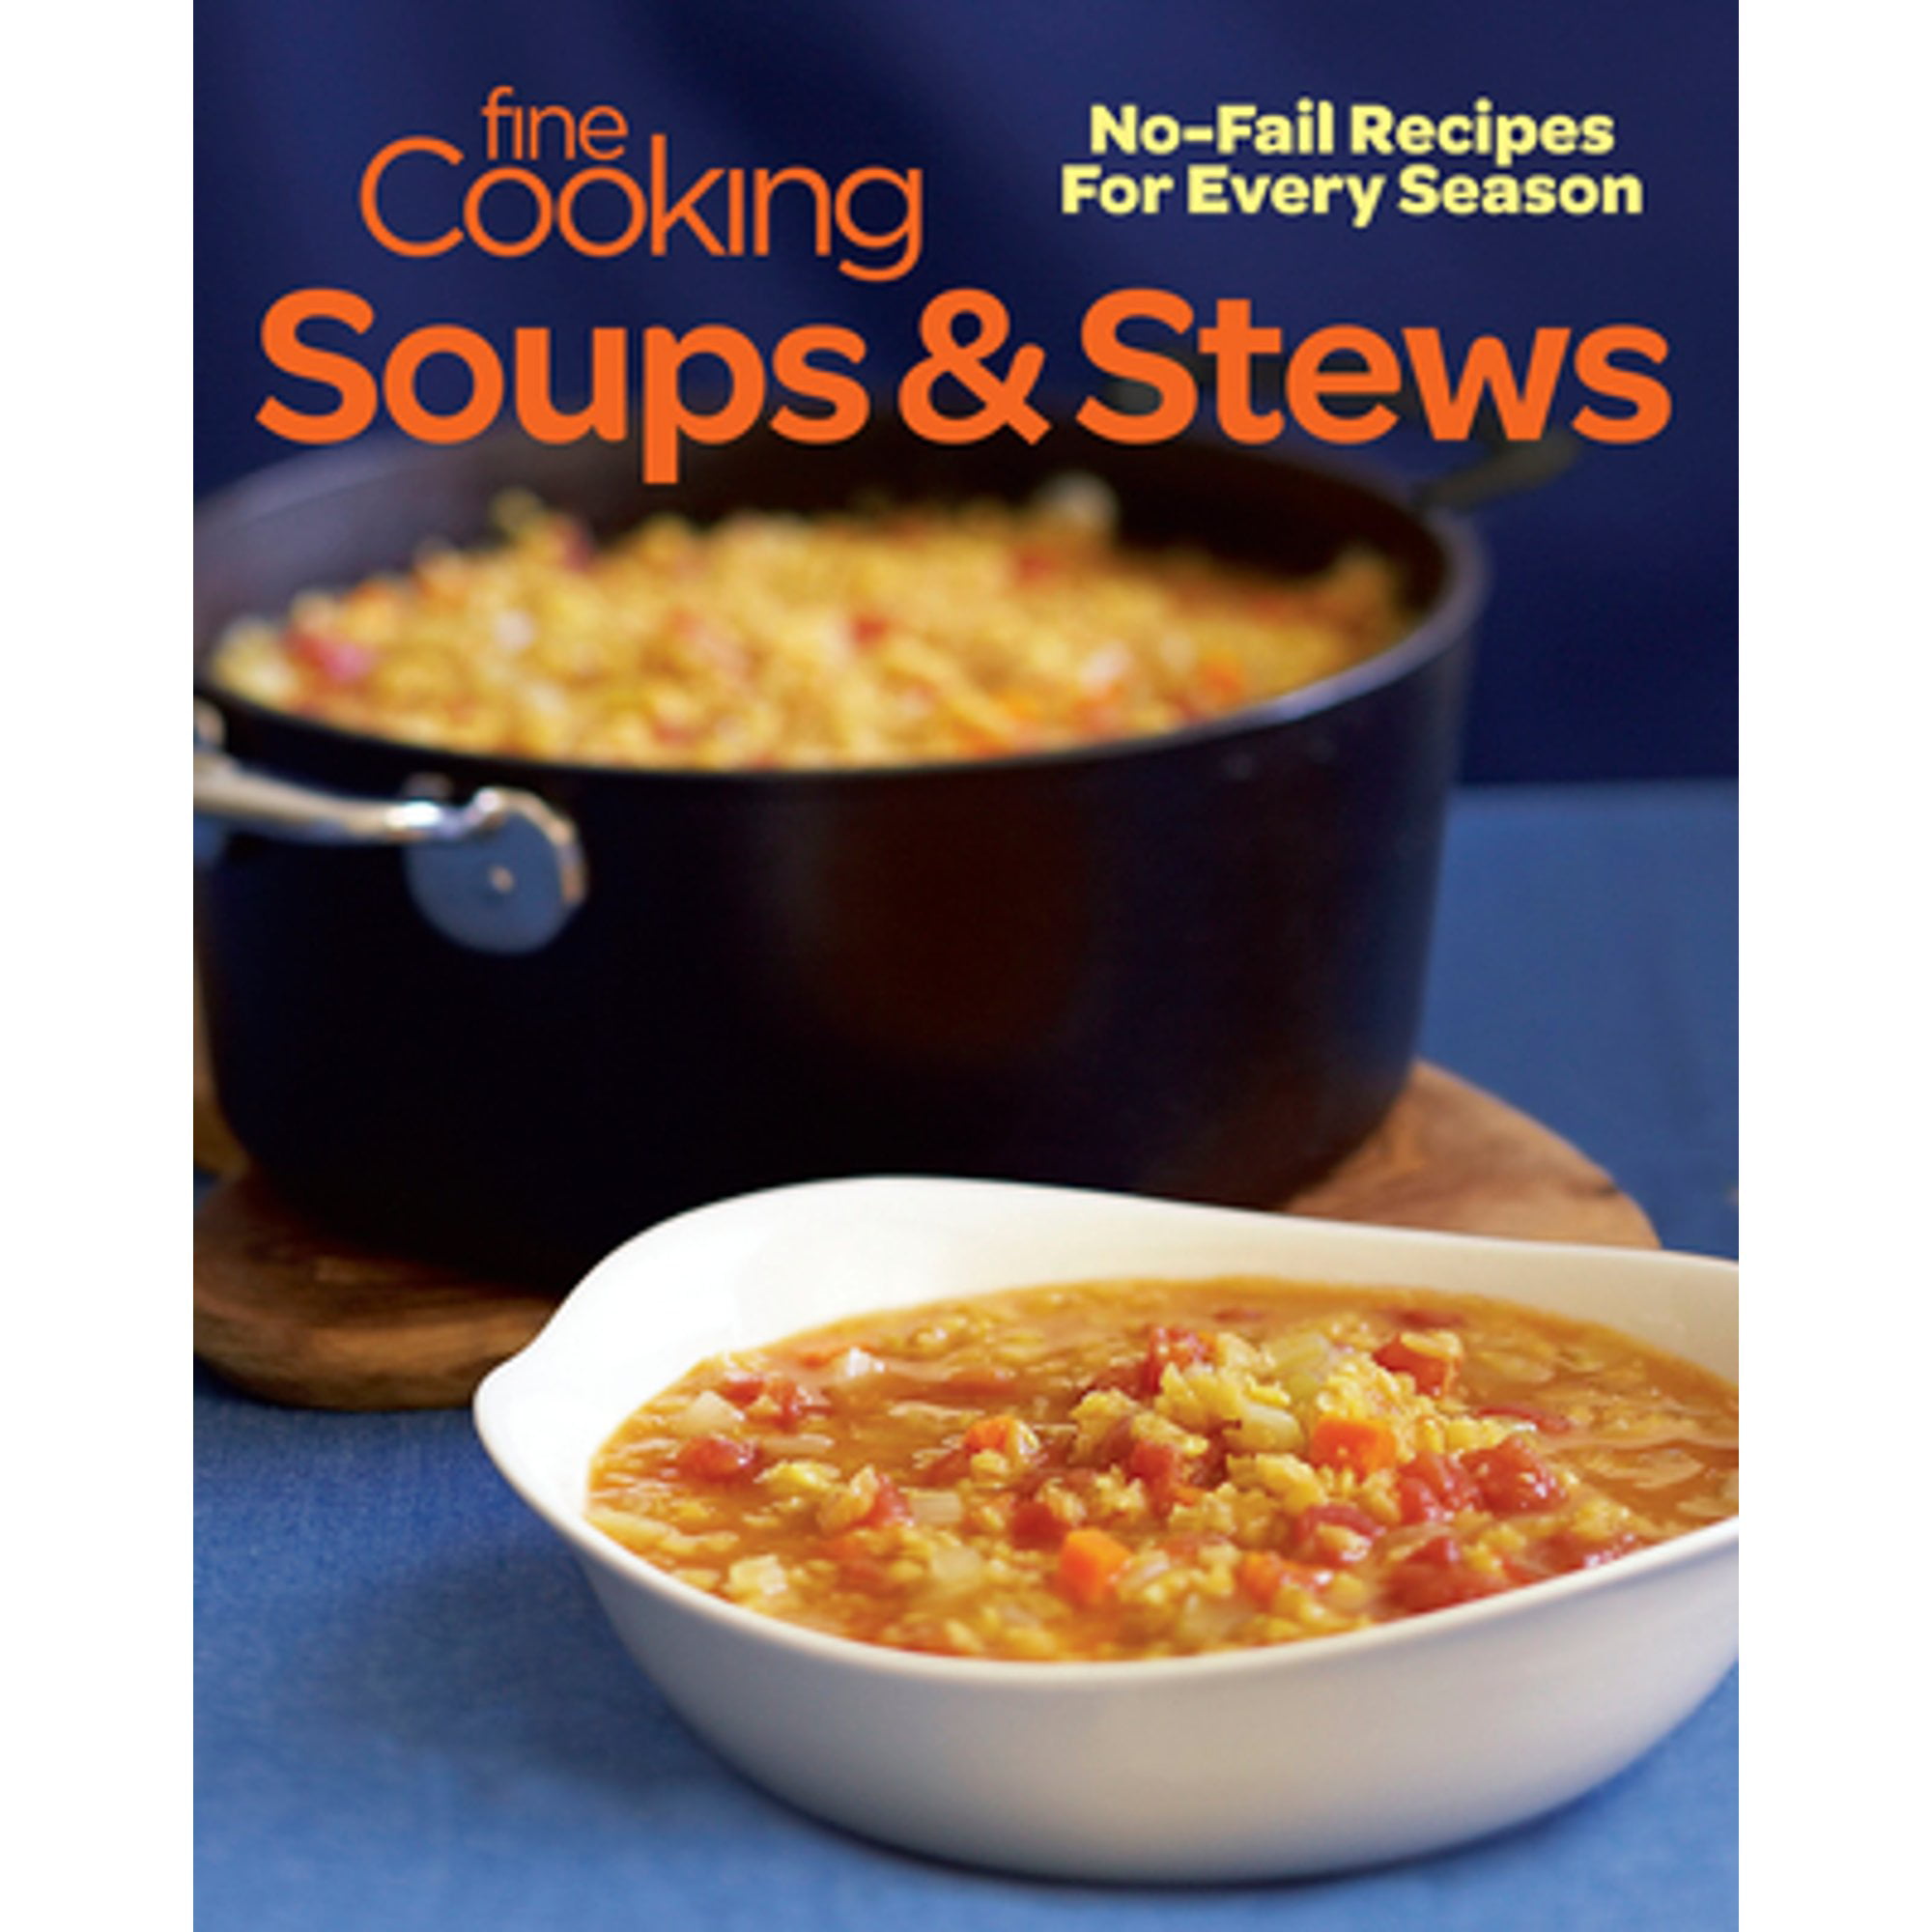 Fine Cooking Soups & Stews : No-Fail Recipes for Every Season